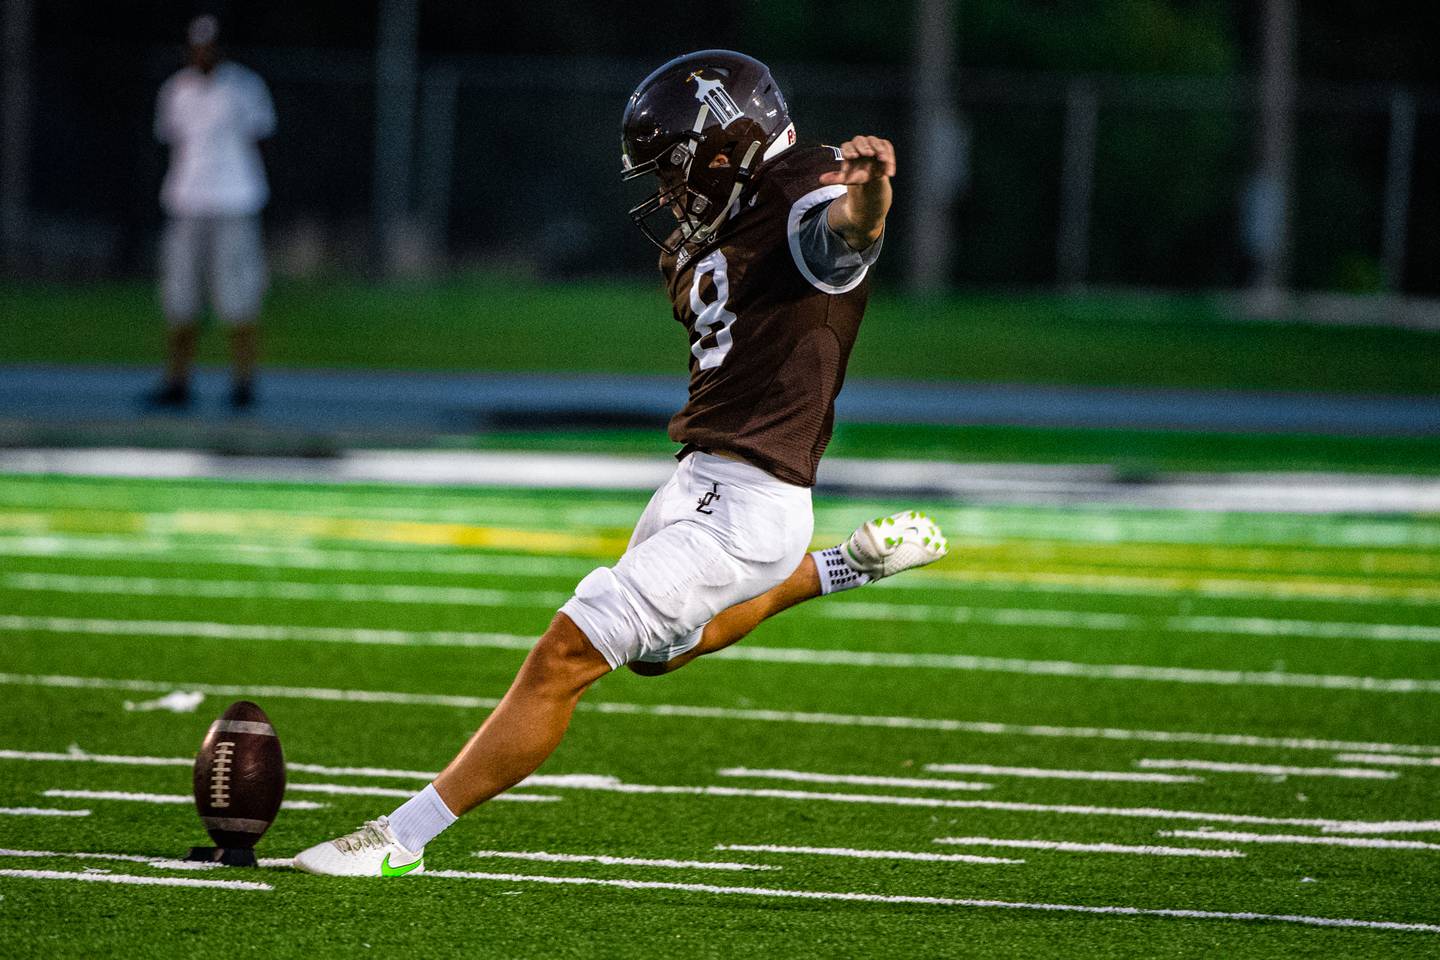 Joliet Catholic's Patrick Durkin kicks off the game against Immaculate Conception on Friday, Sept. 2, 2022, at Memorial Stadium in Joliet.